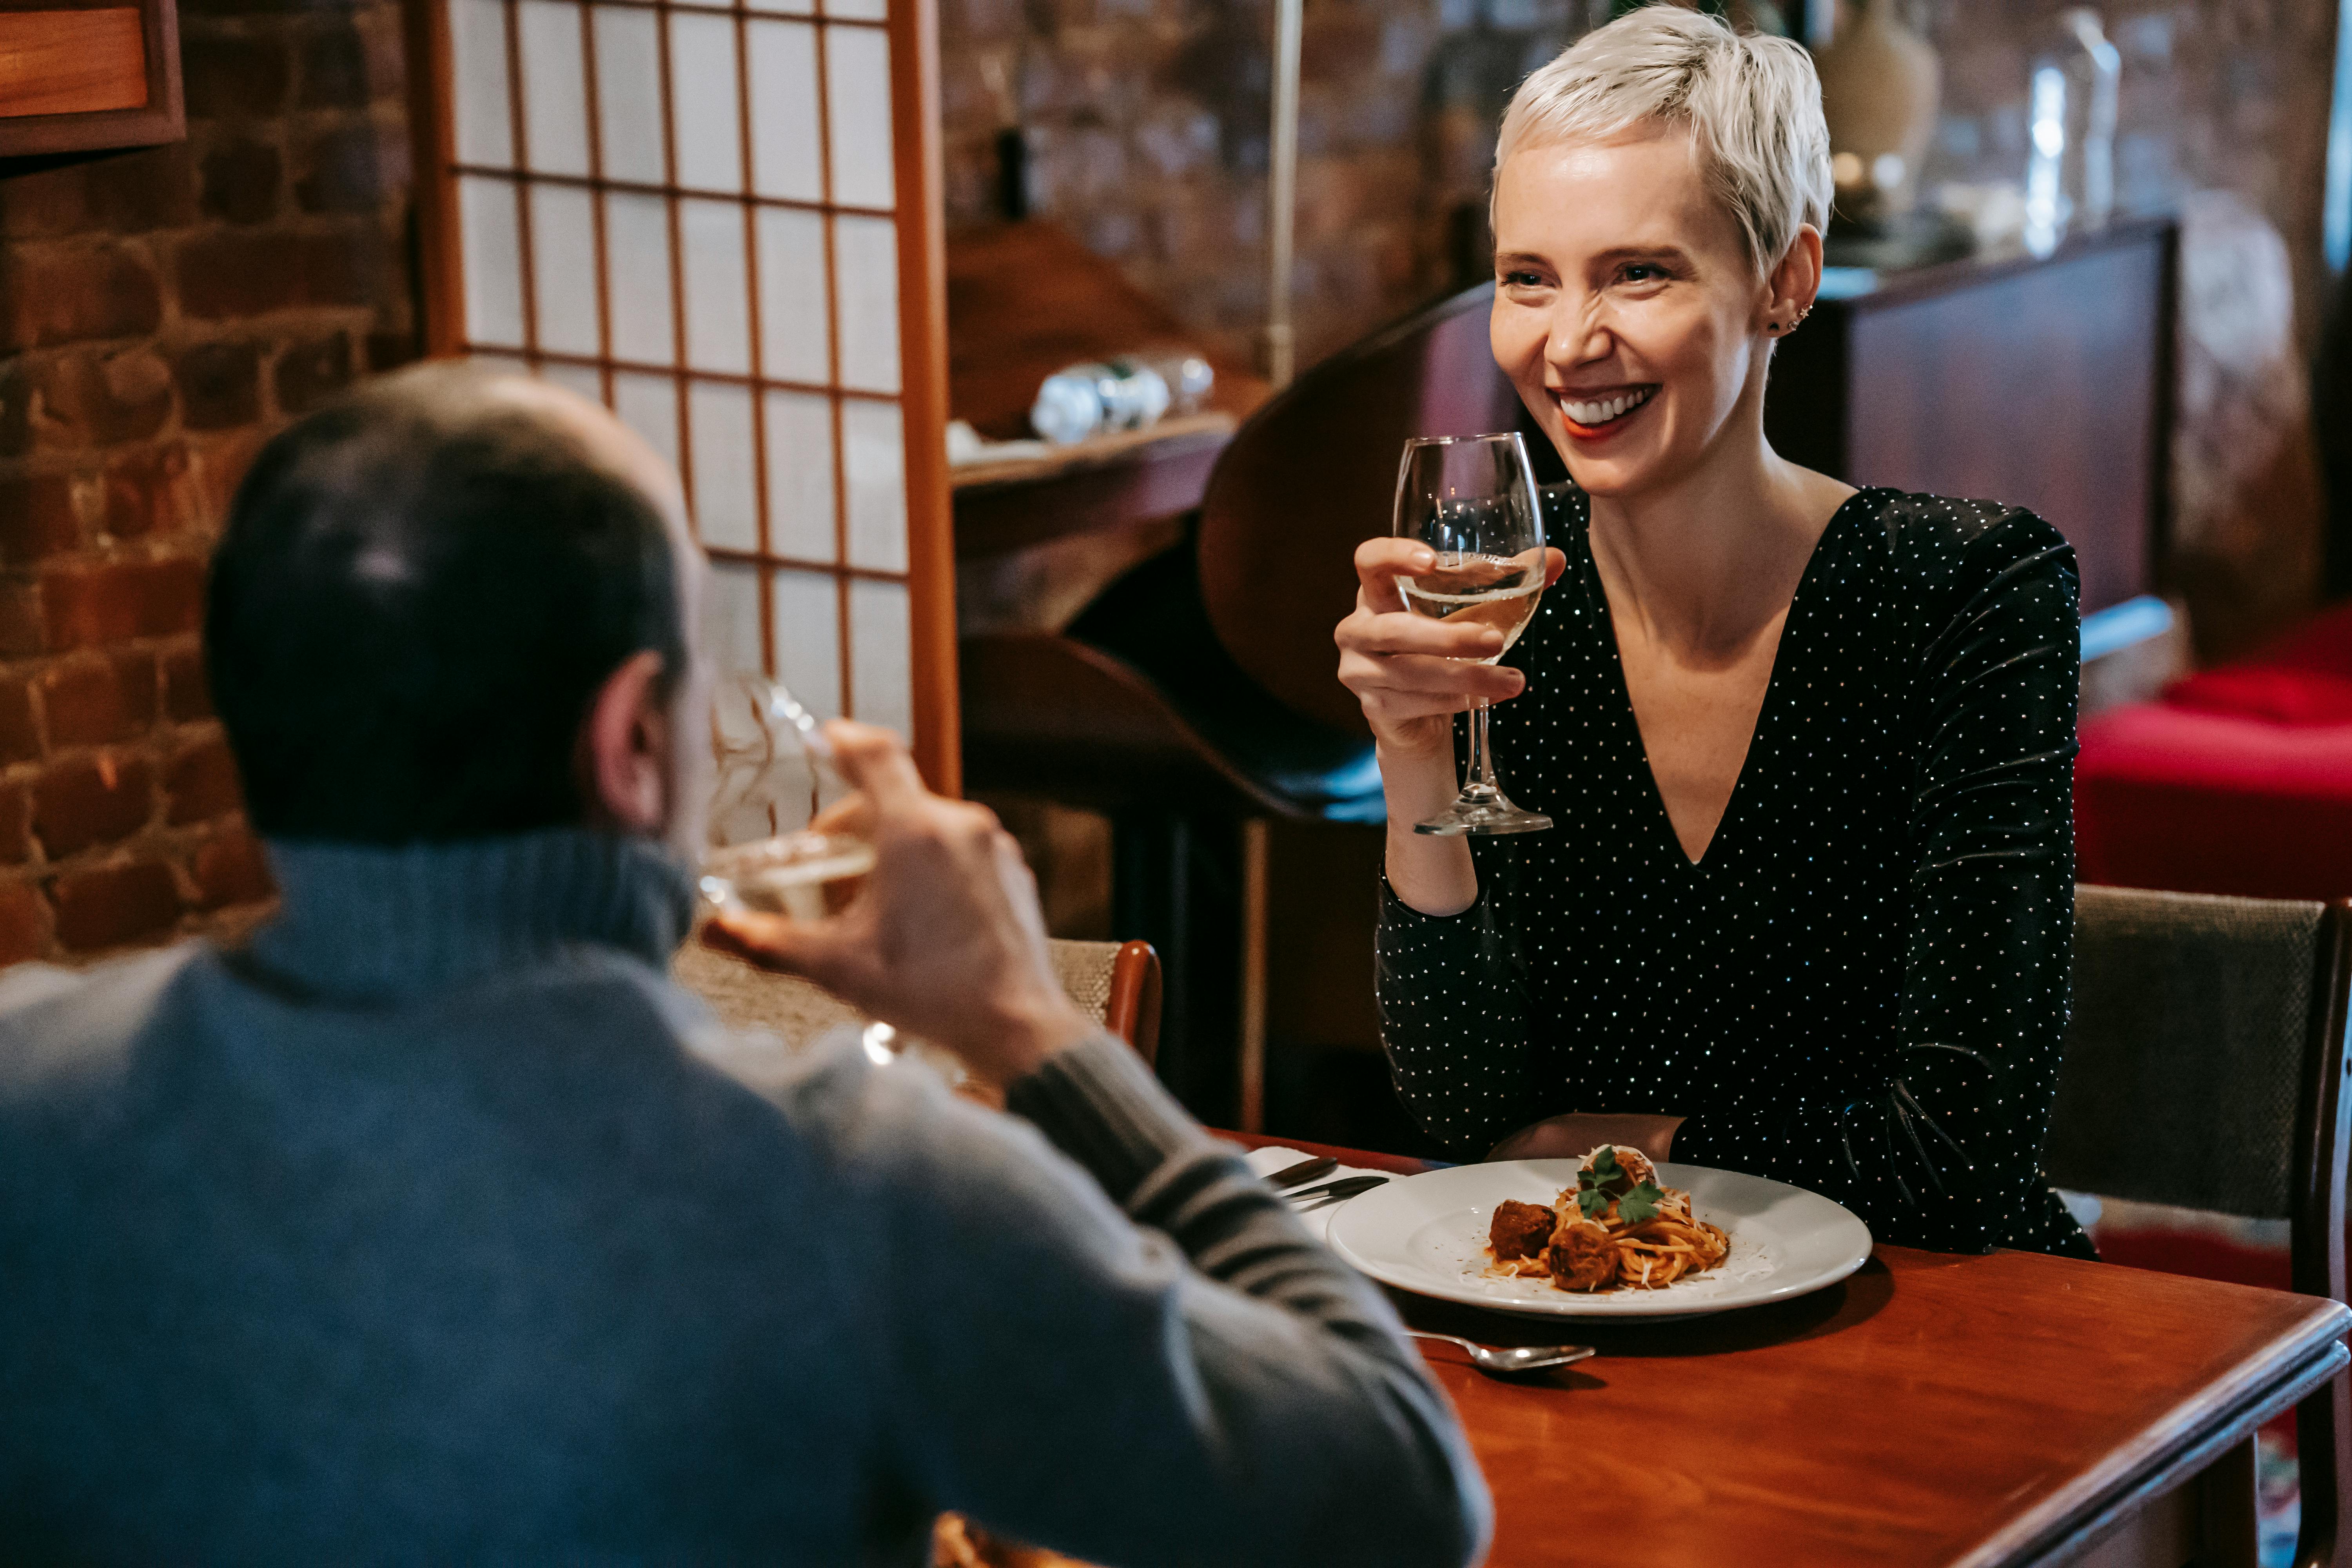 woman smiles at a man as they sit at a table on a date together